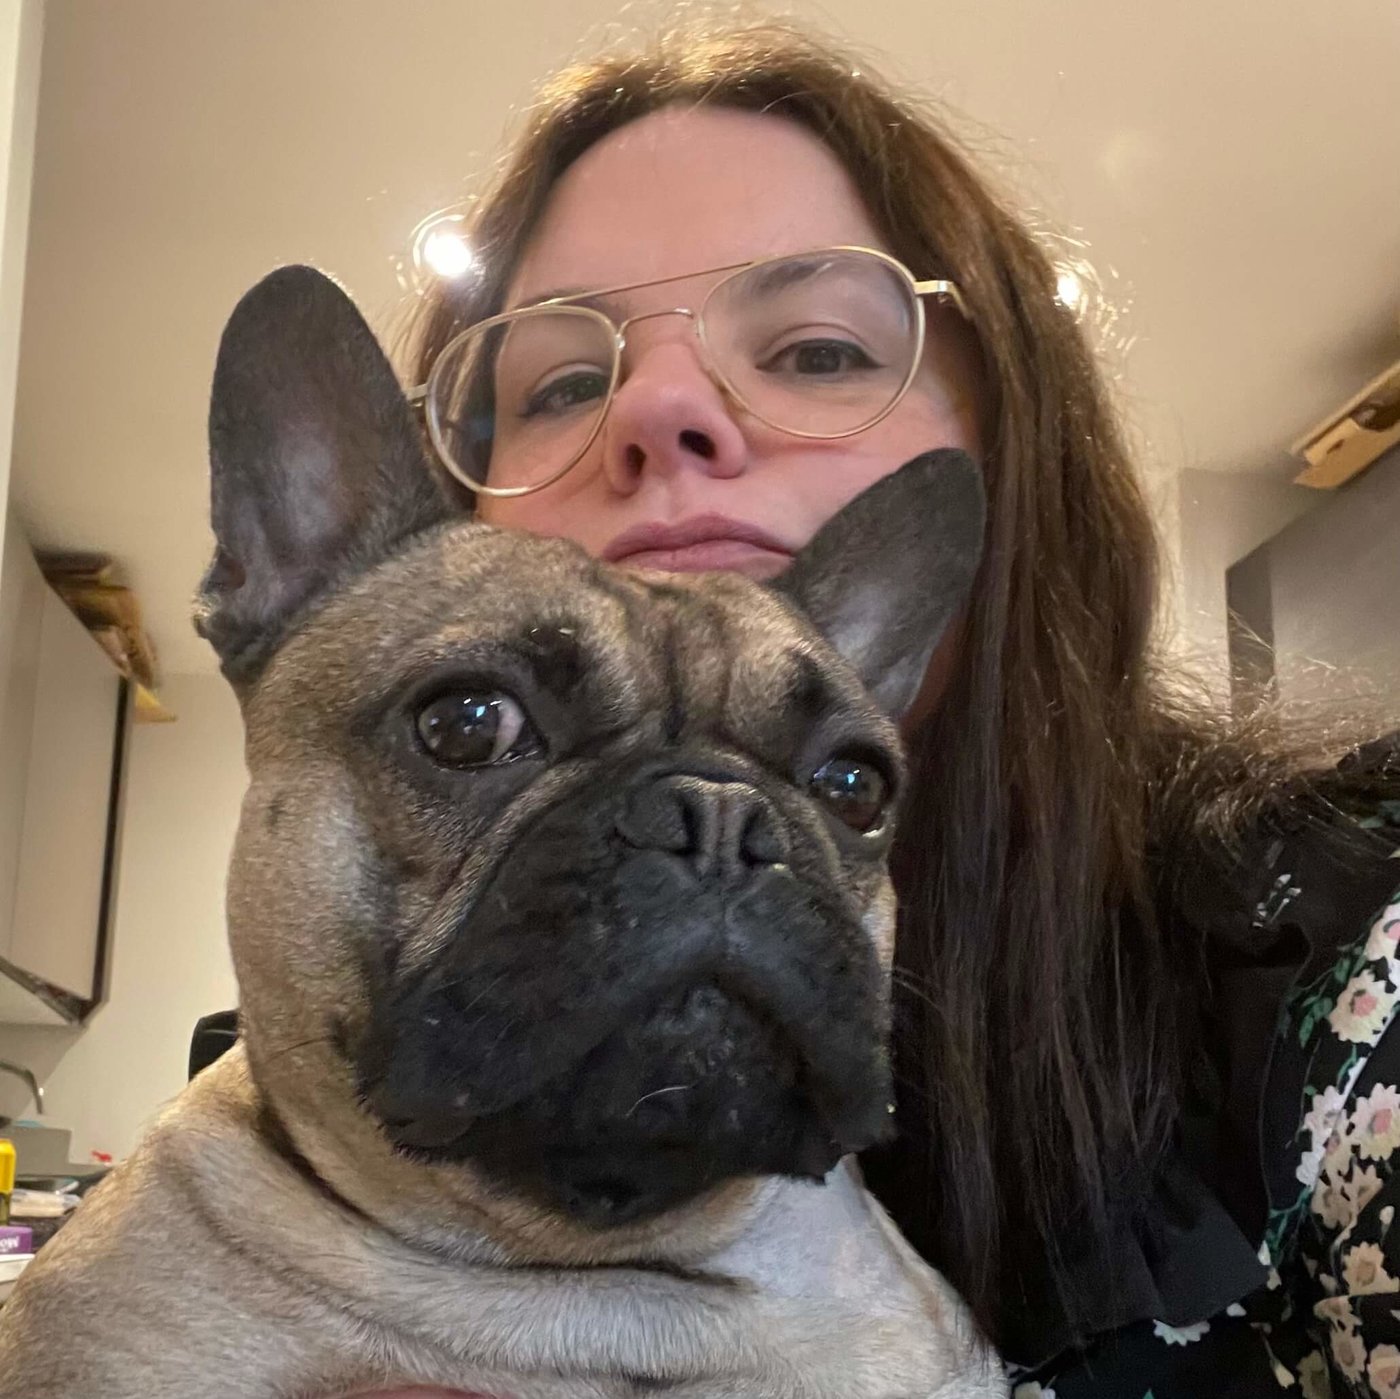 Selfie of Susan with her dog Rambo